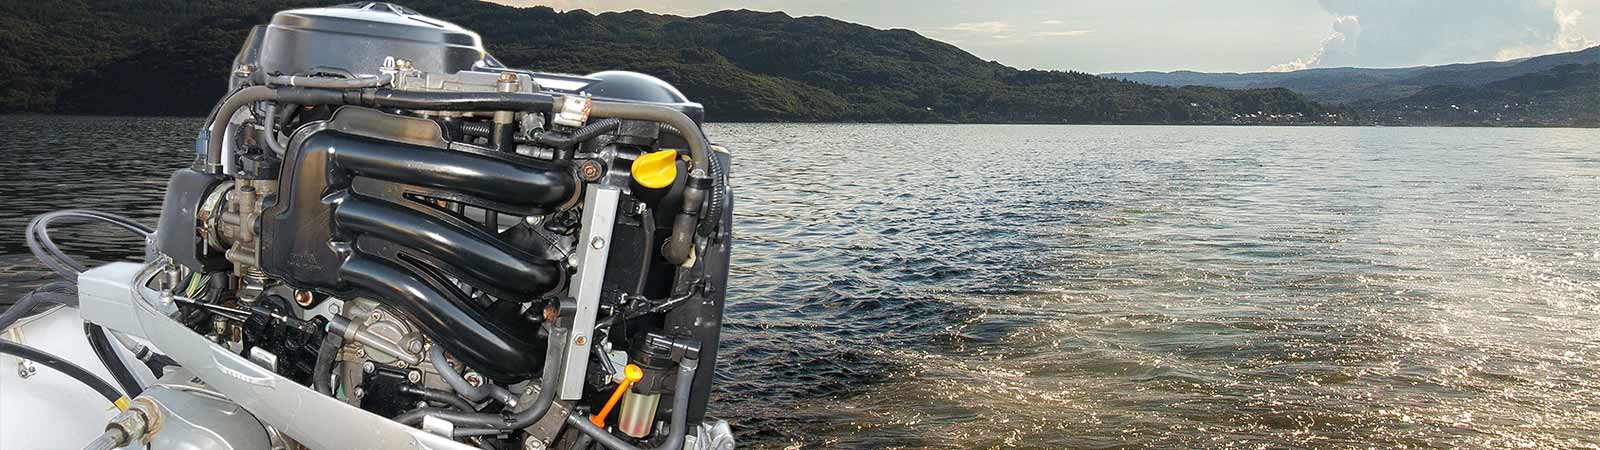 outboard motor repairs and servicing